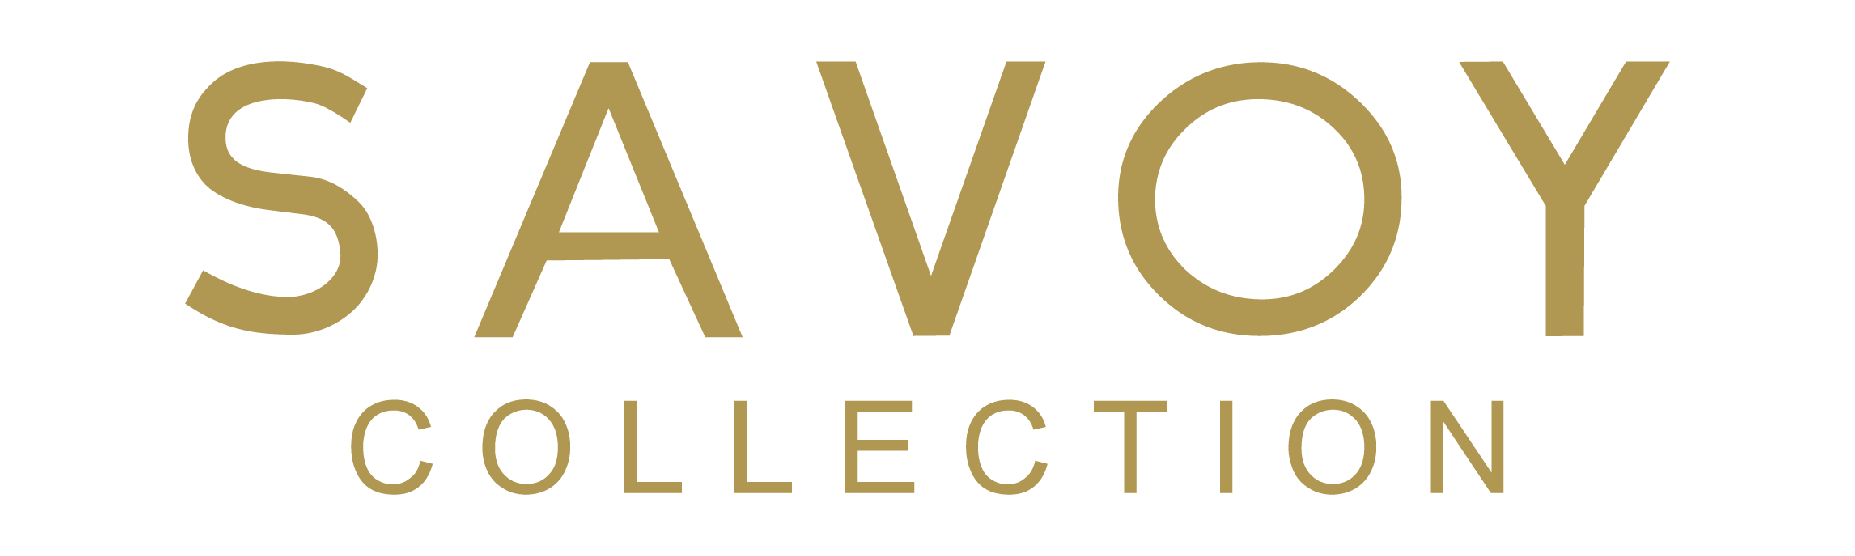 the_savoy_collection_2